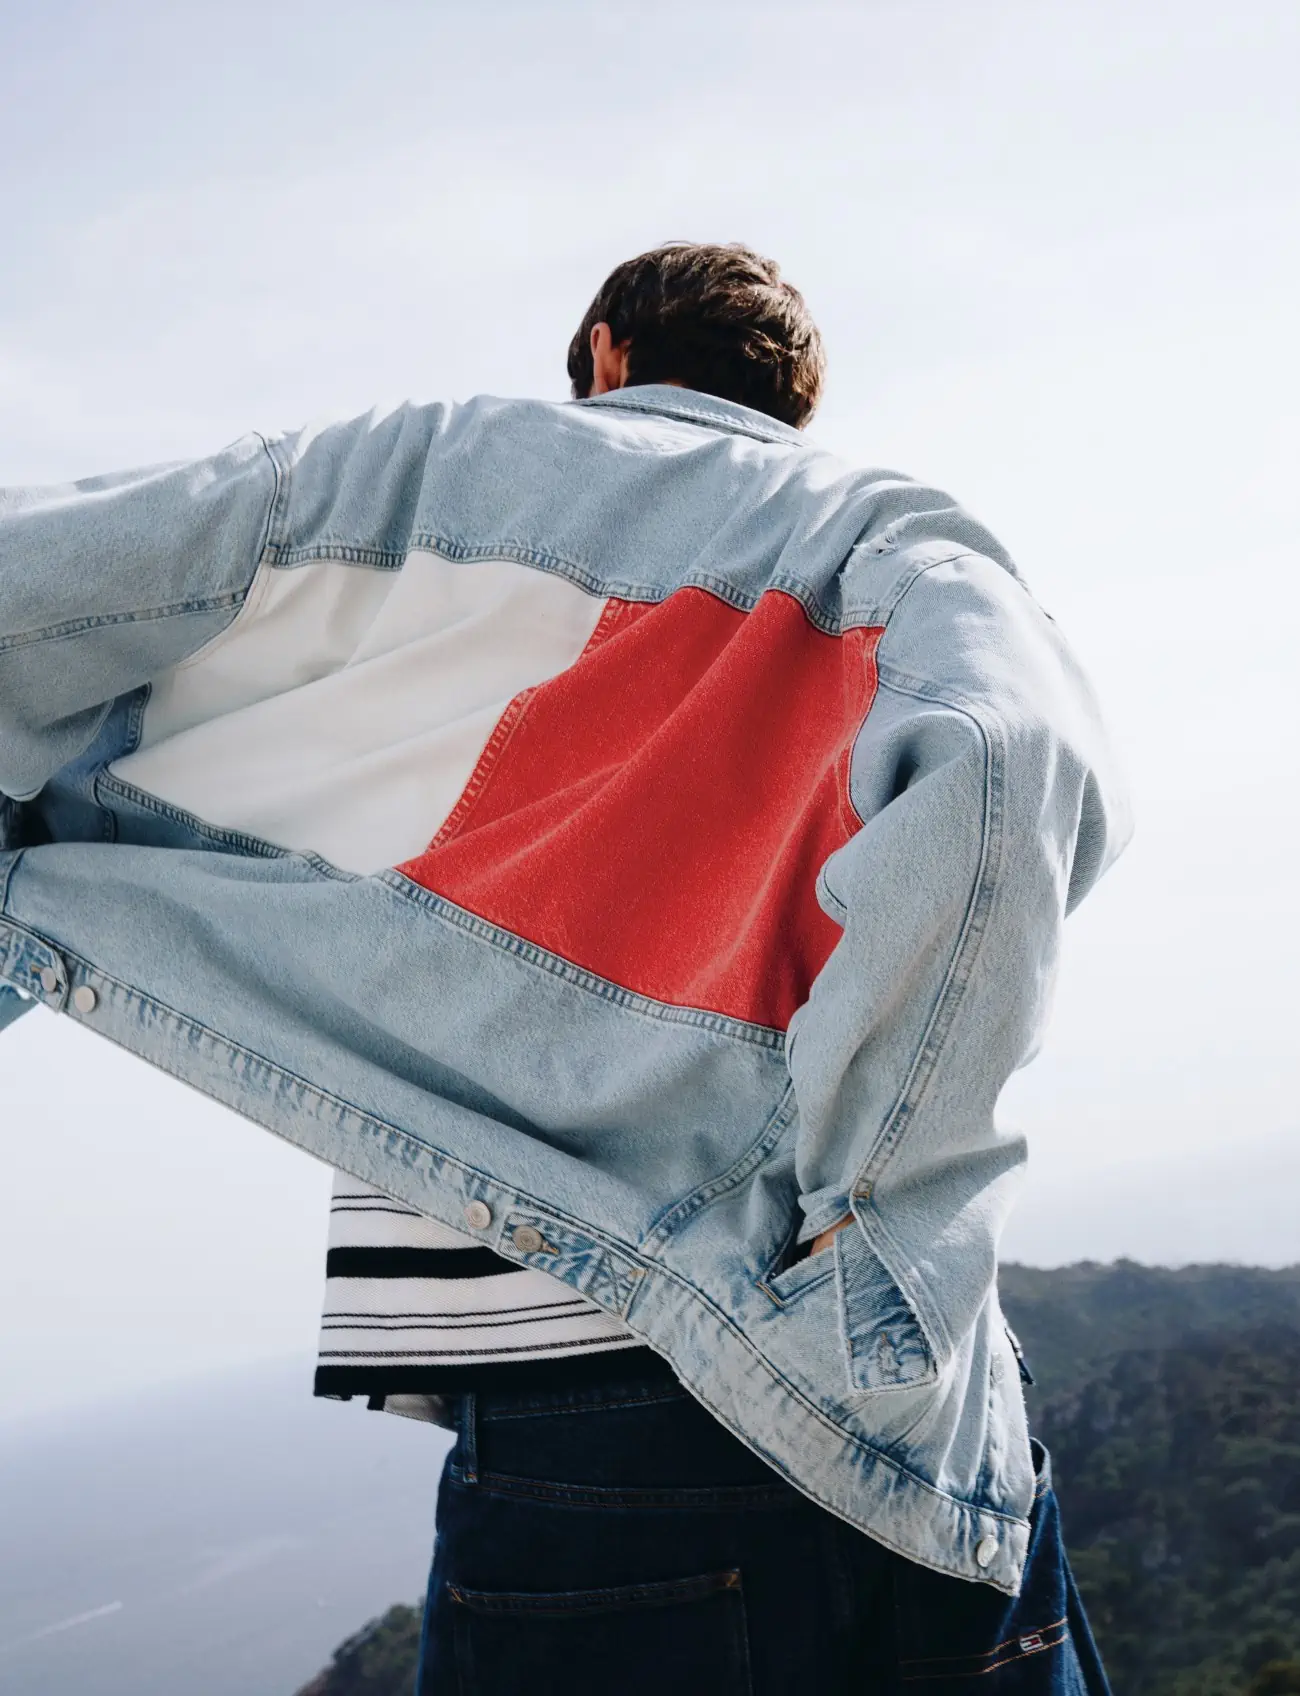 Tommy Jeans Spring-Summer 2024 campaign unveils denim for the new age